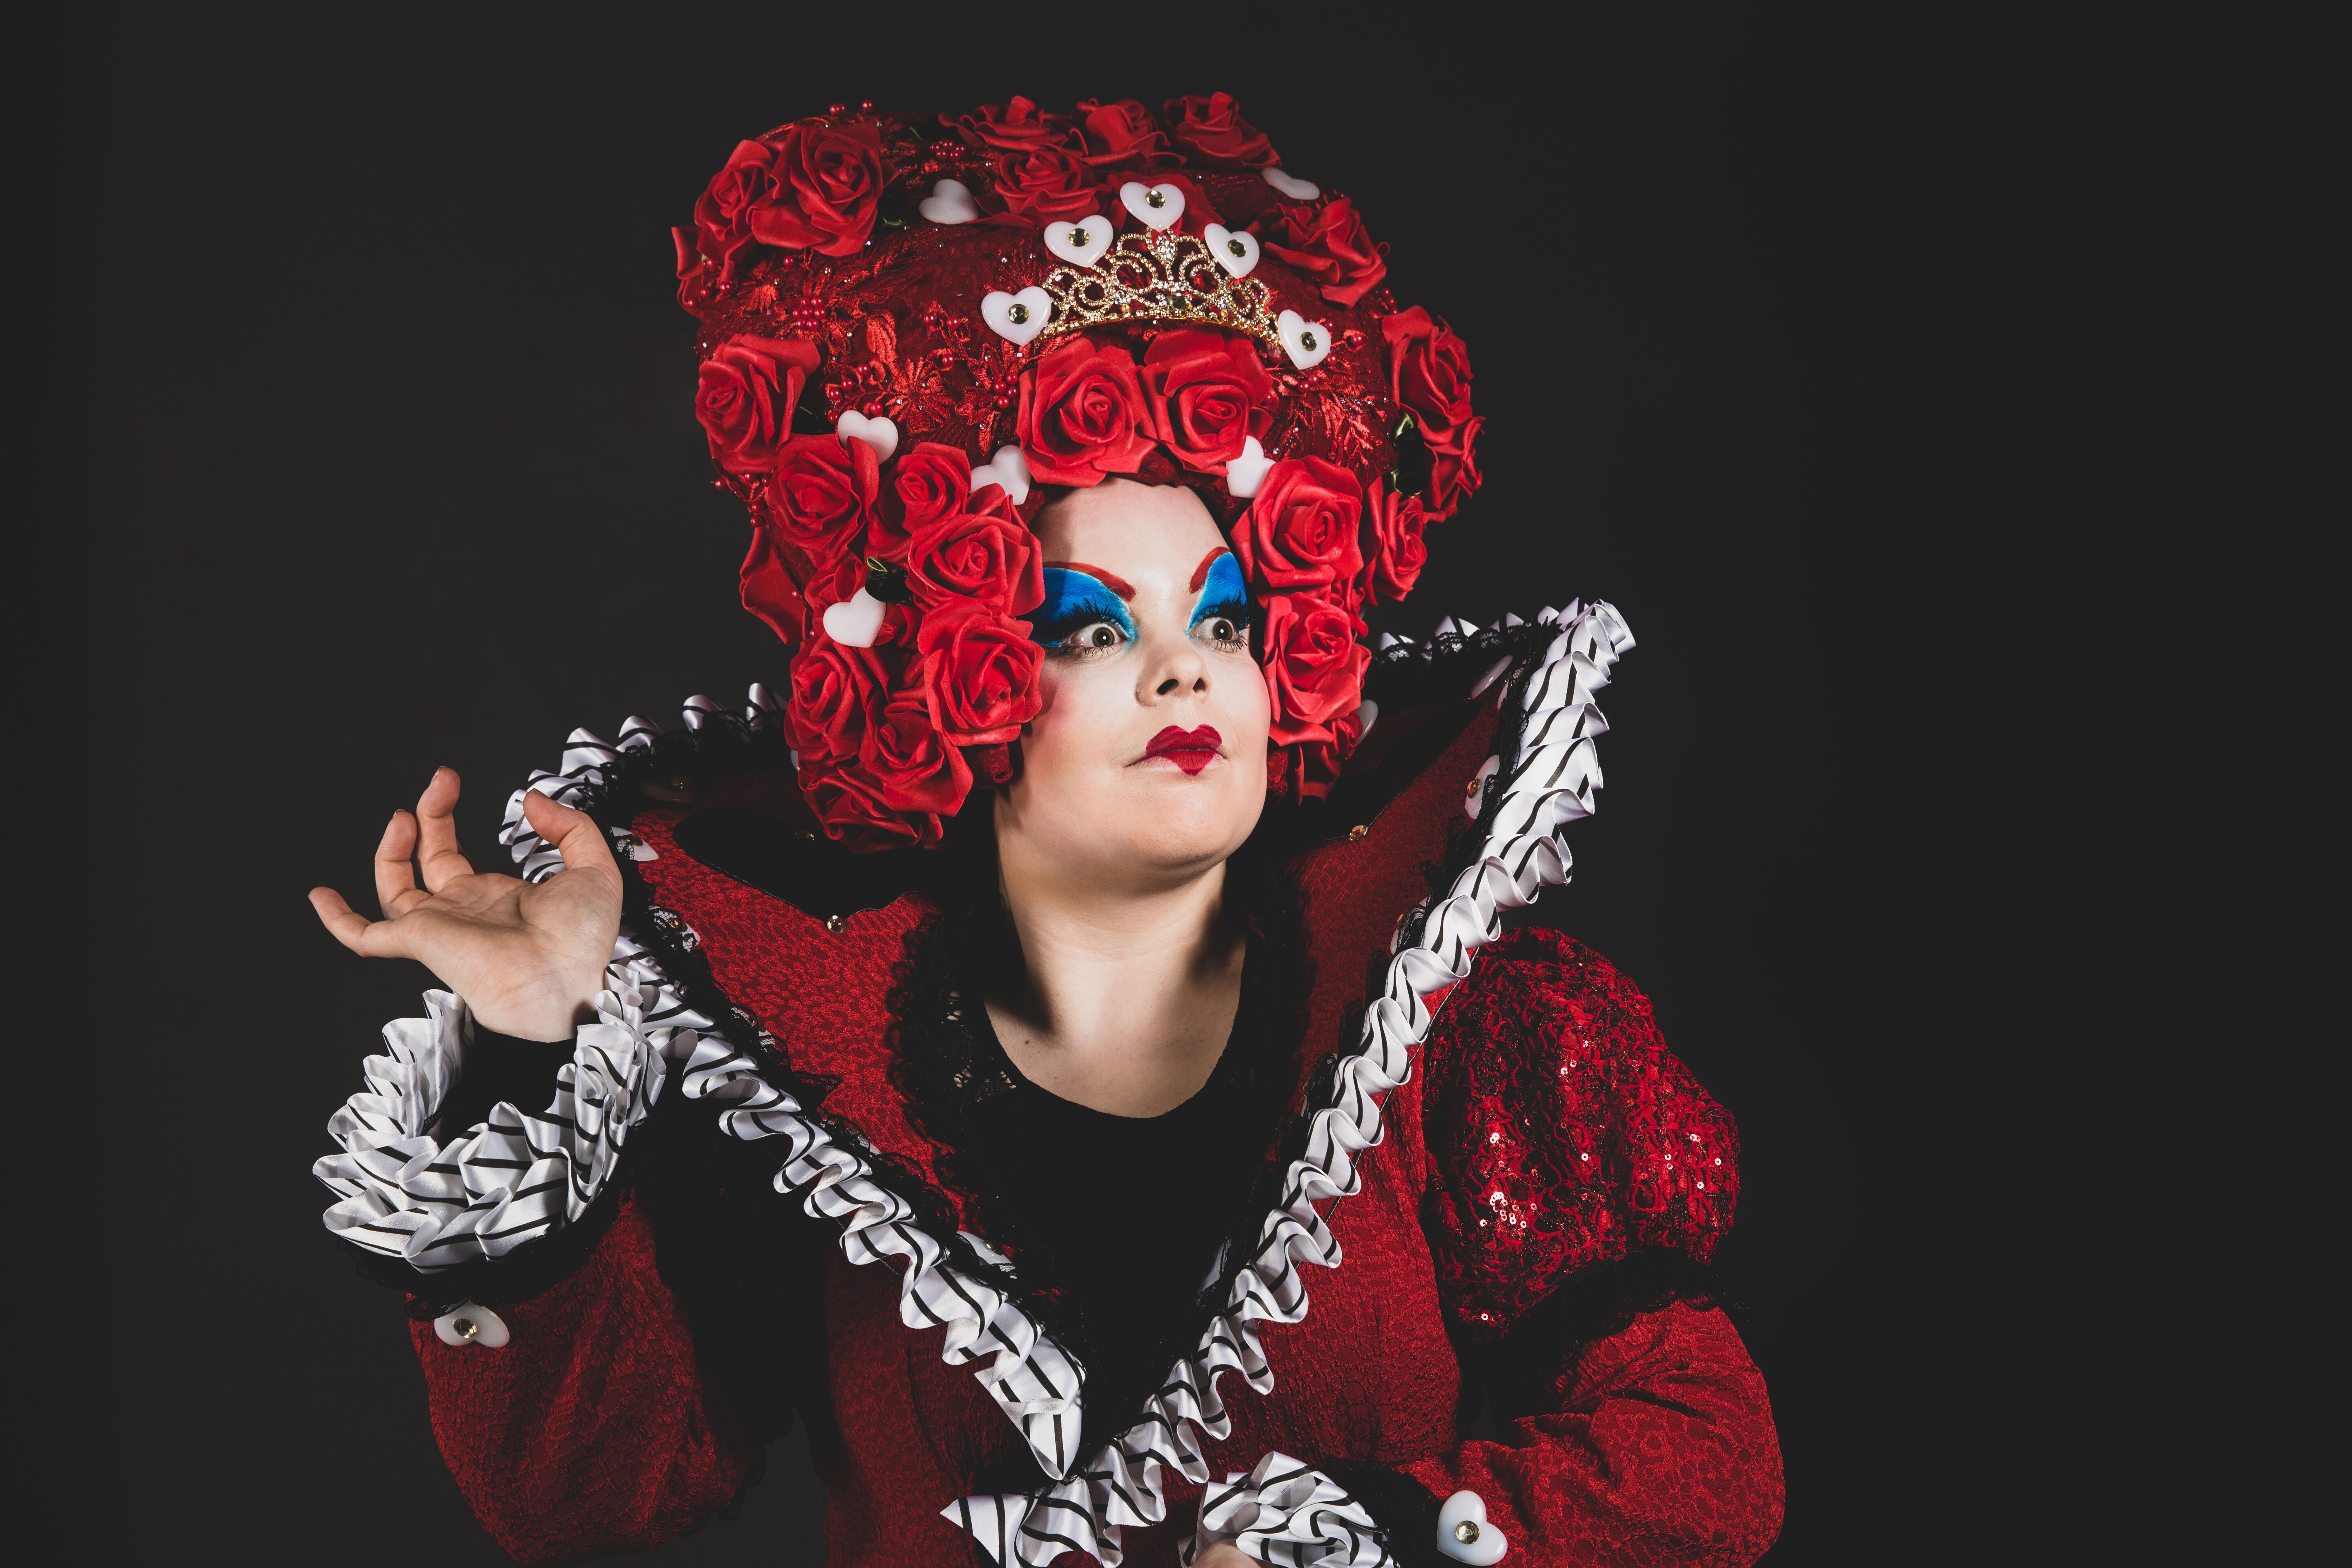 The Queen of Hearts from Alice in Wonderland at Waterside Arts. She is wearing a red dress with a wig of red roses.